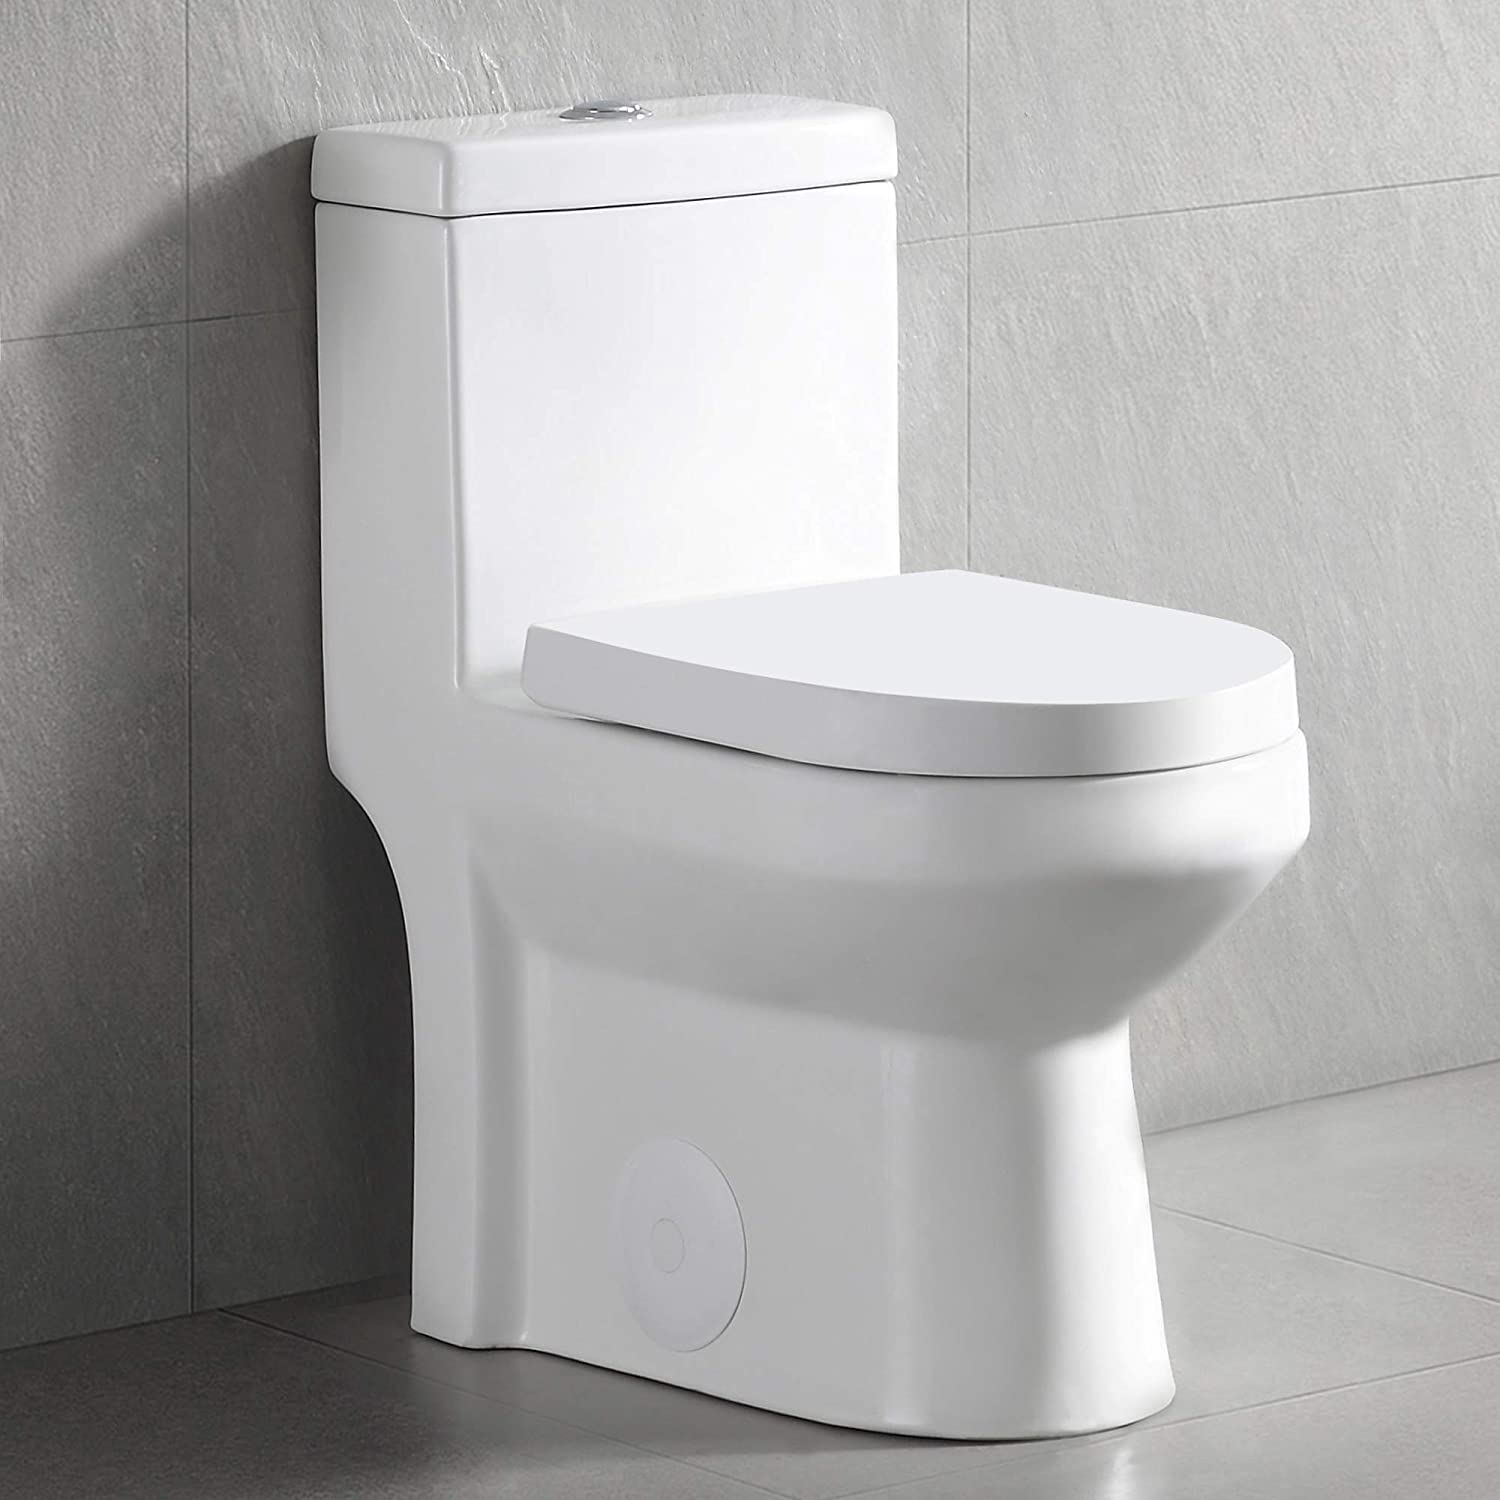 DeerValley DV-1F52812 Modern Small One-Piece Toilet, Compact Bathroom Tiny Mini Commode Water Closet Dual Flush Concealed (White)